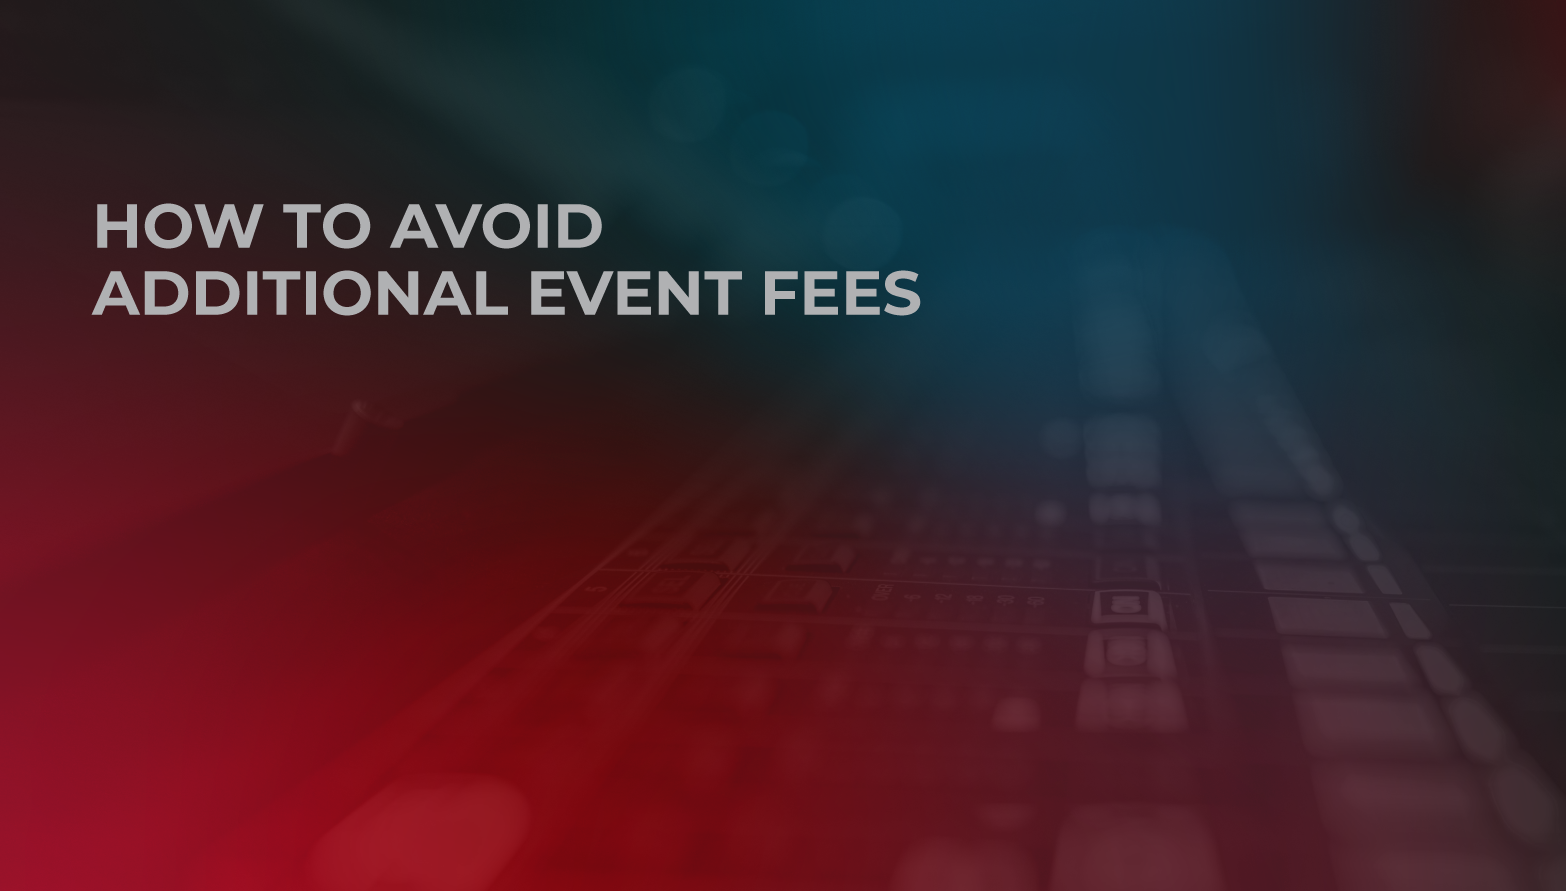 How to Avoid Additional Event Fees